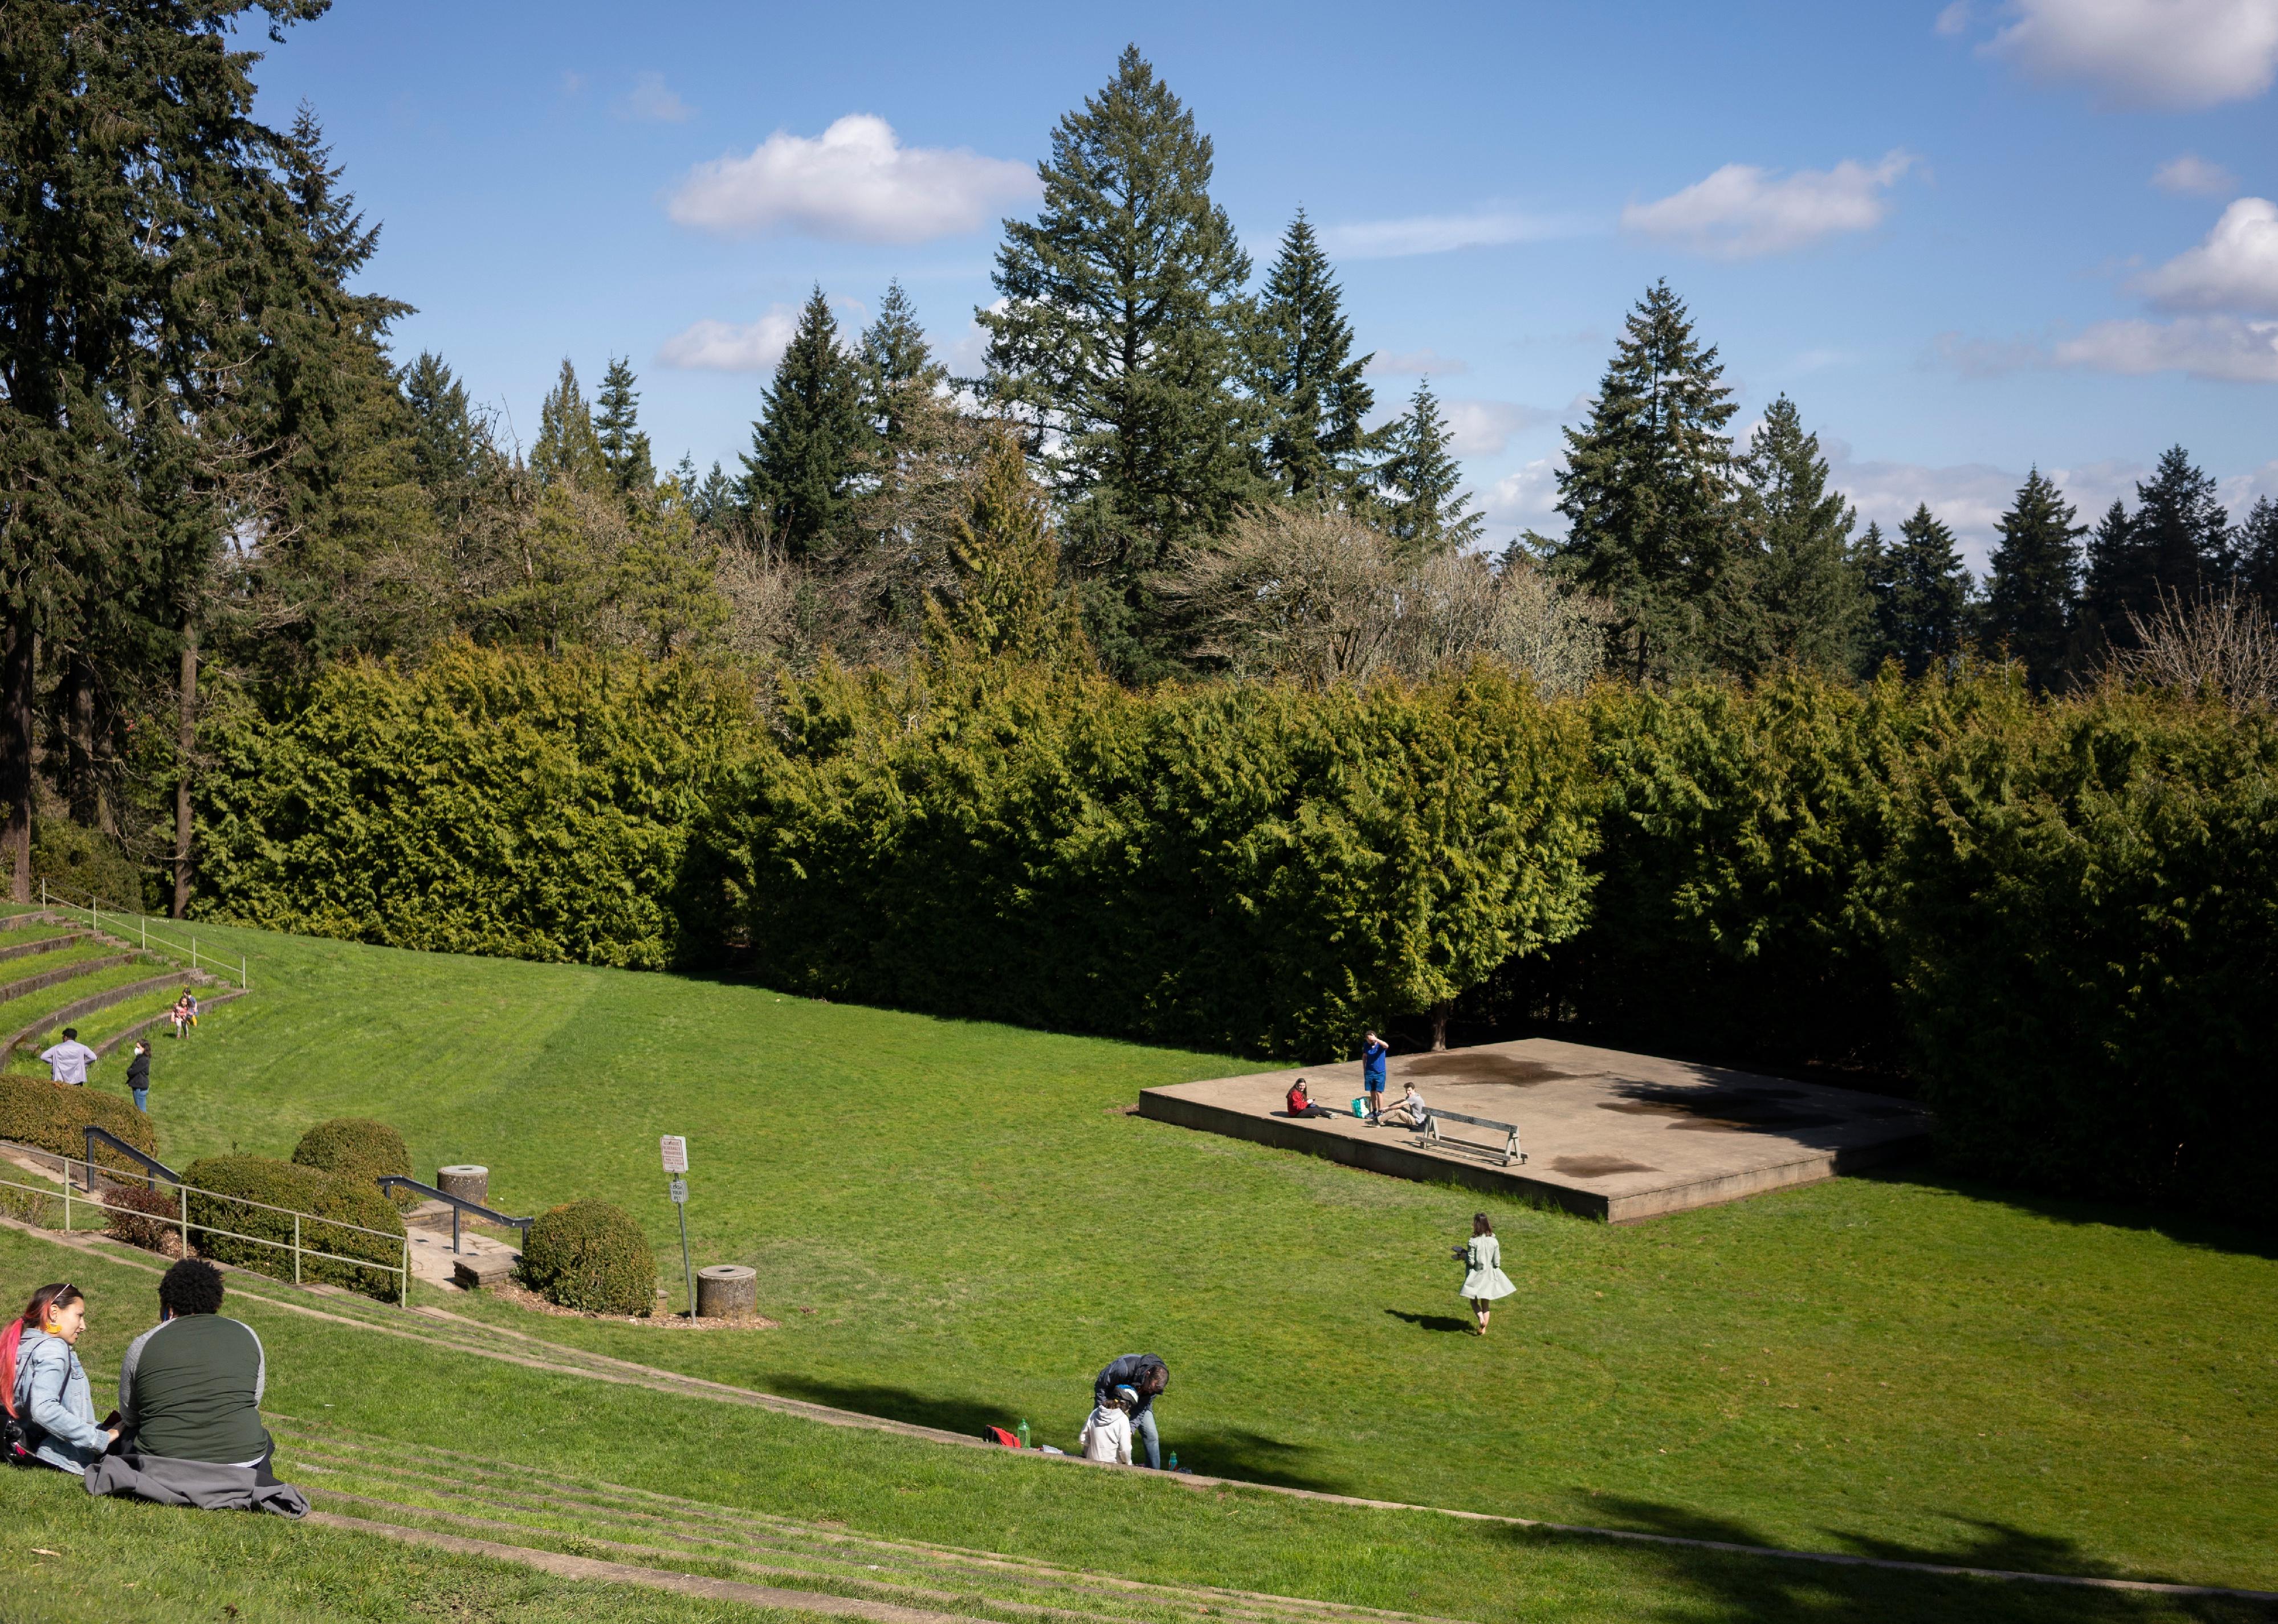 Visitors to the Washington Park amphitheater in Portland seated on the grass.